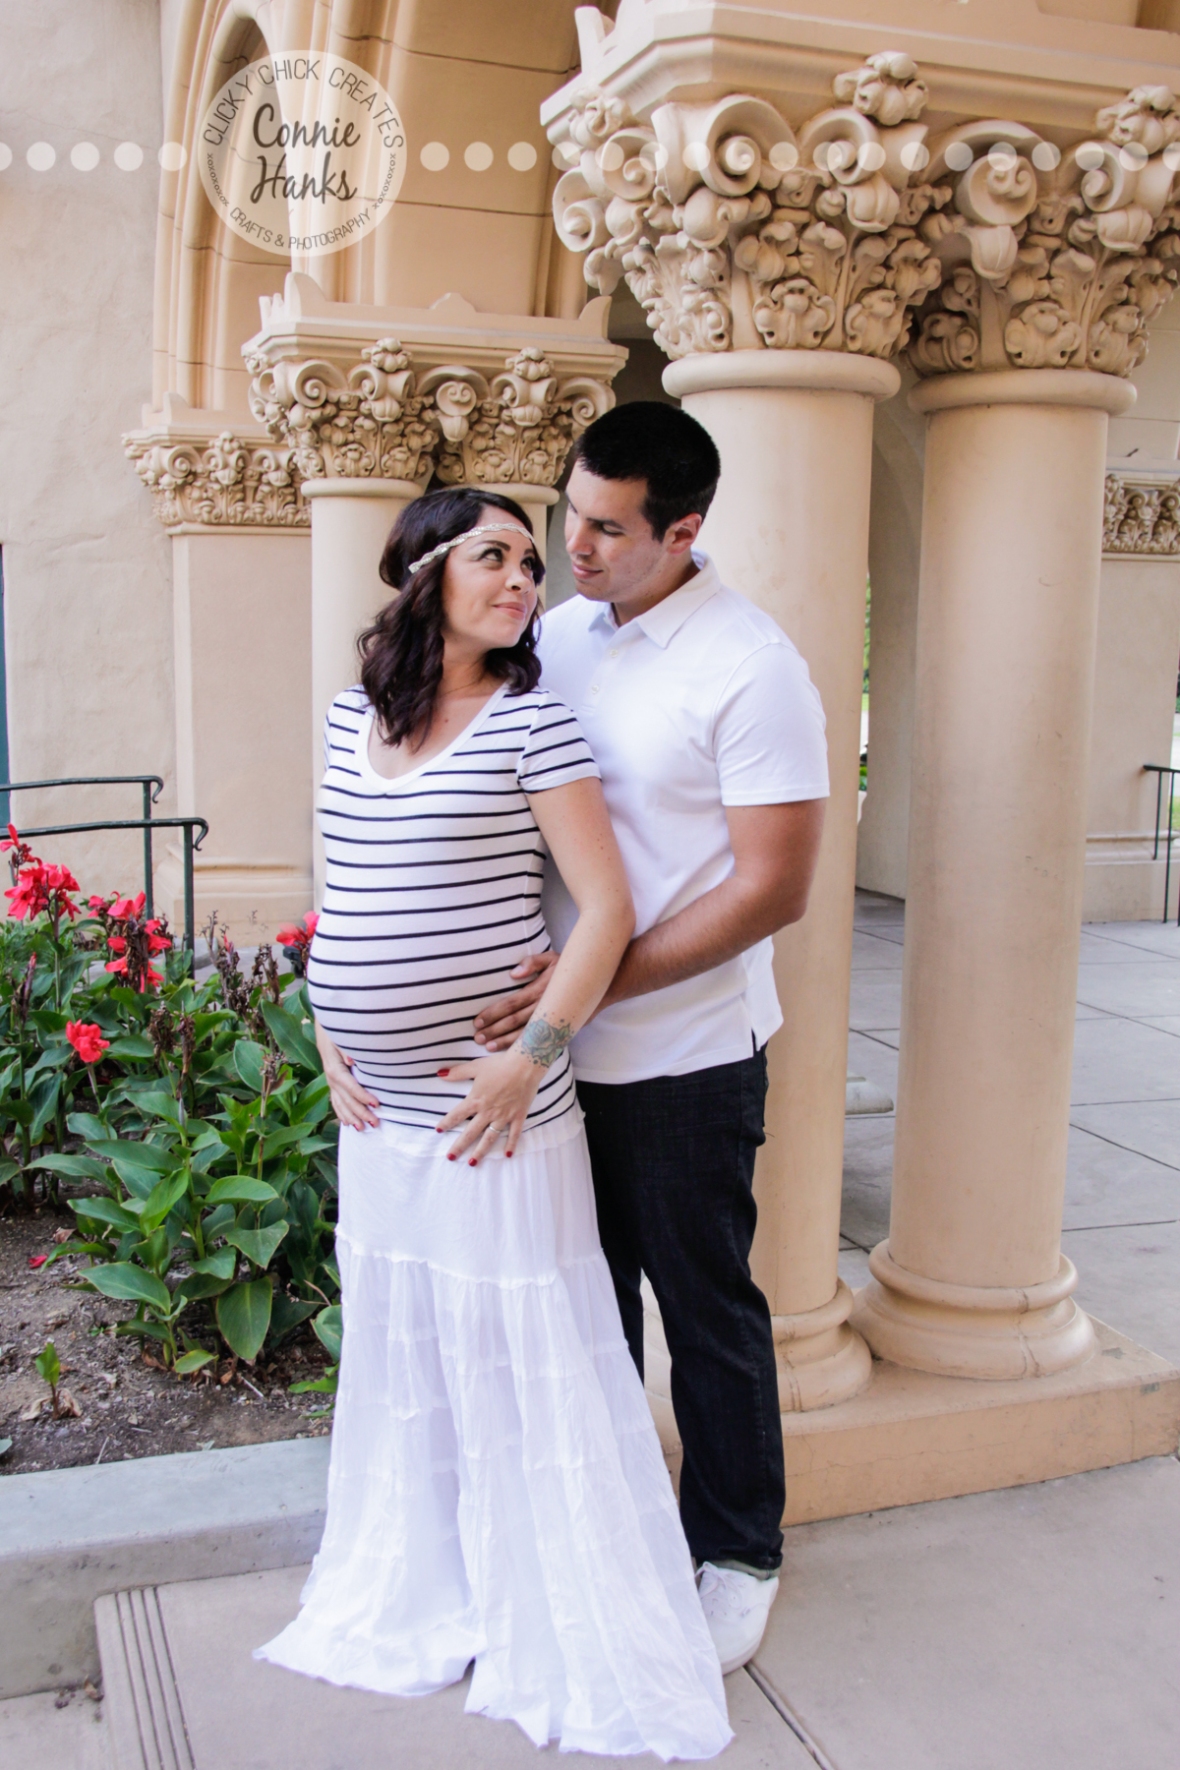 Connie Hanks Photography // ClickyChickCreates.com // Maternity session, baby bump, Balboa Park, family of three growing to four, pregnancy, big sister, baby, couple